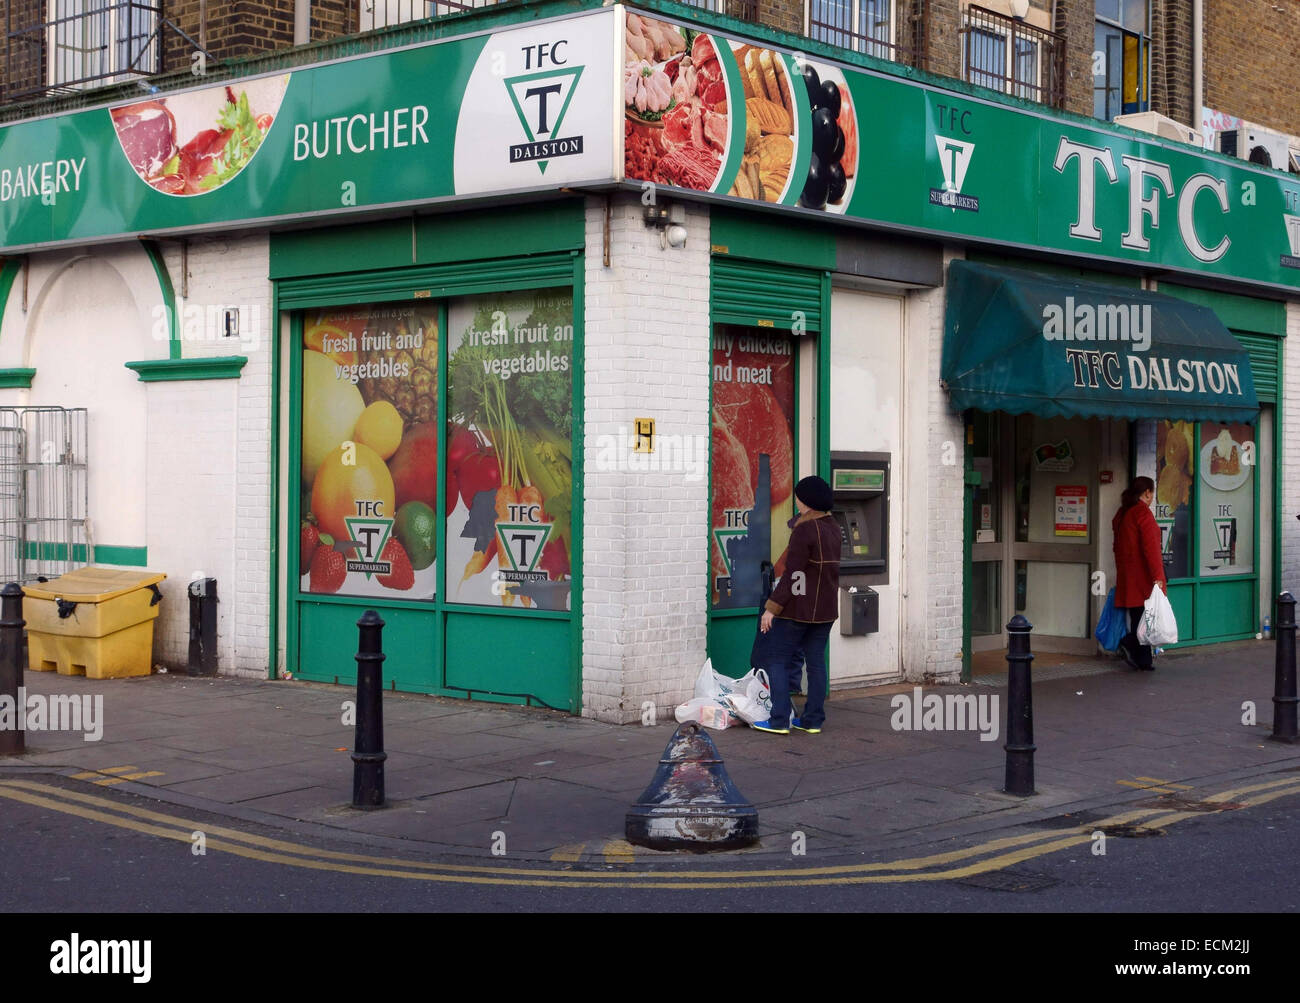 Turkish Food Centre in Ridley Road Market, Dalston, London Stock Photo